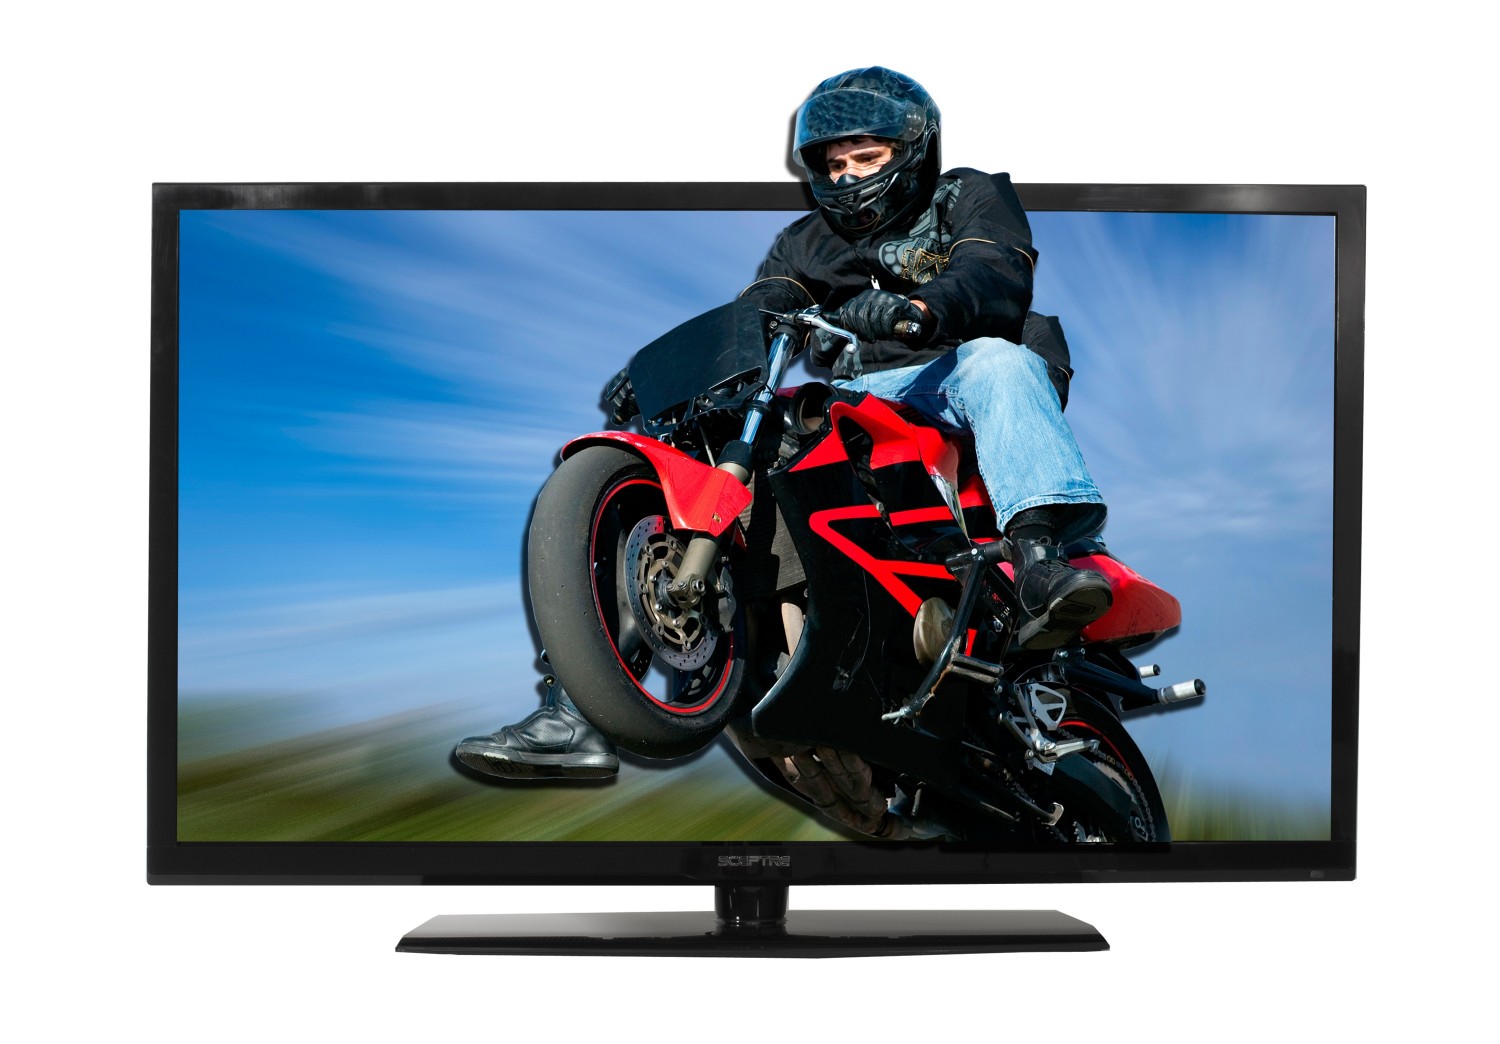 Sceptre unveils the affordable, cost friendly 46-inch LED HDTV 3D home entertainment